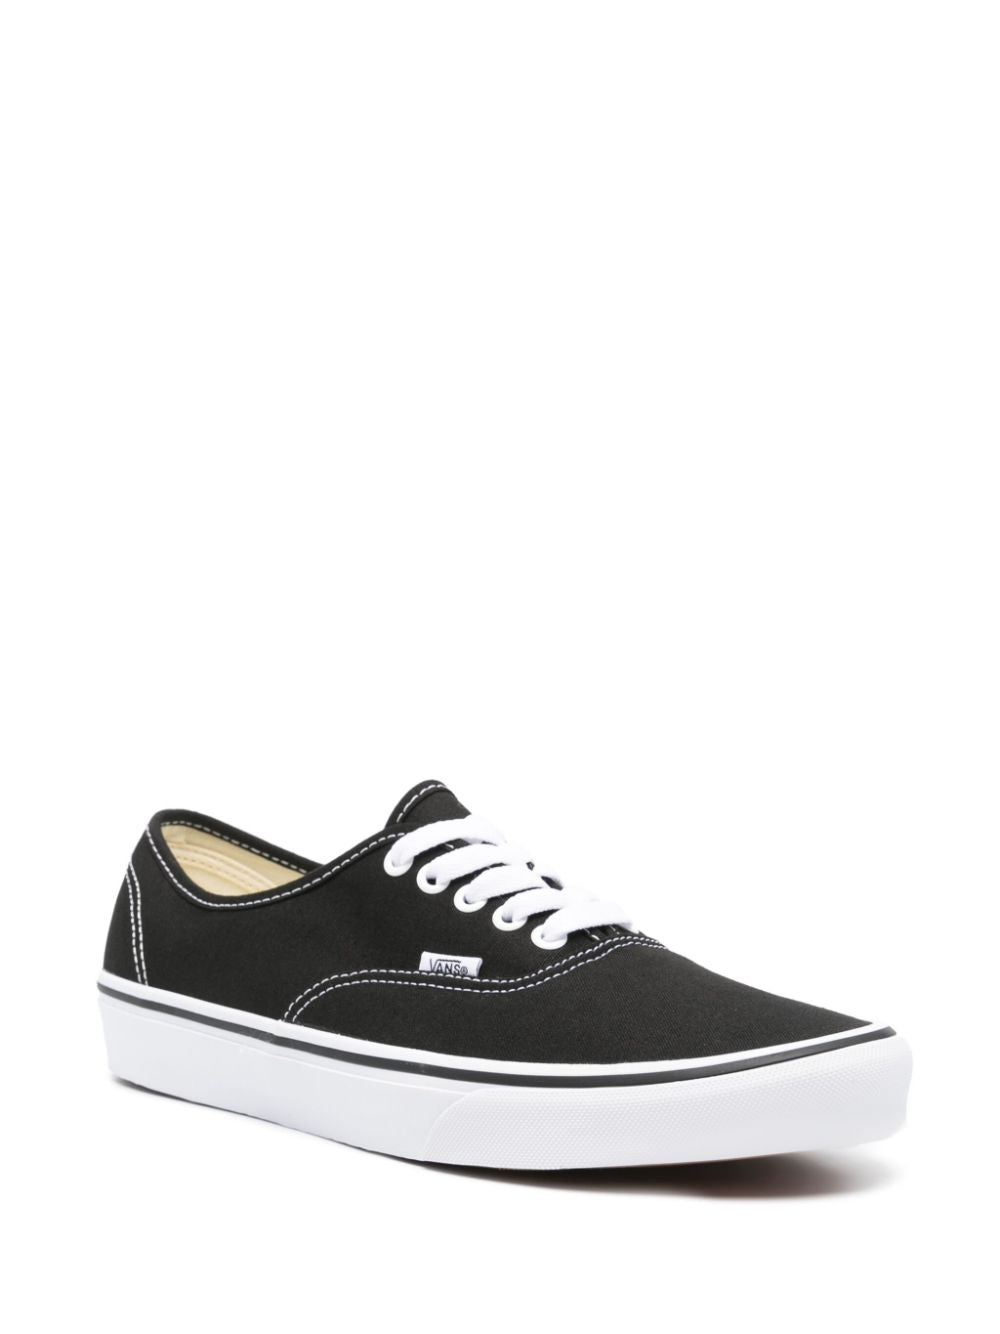 Authentic Canvas sneakers<BR/><BR/><BR/>